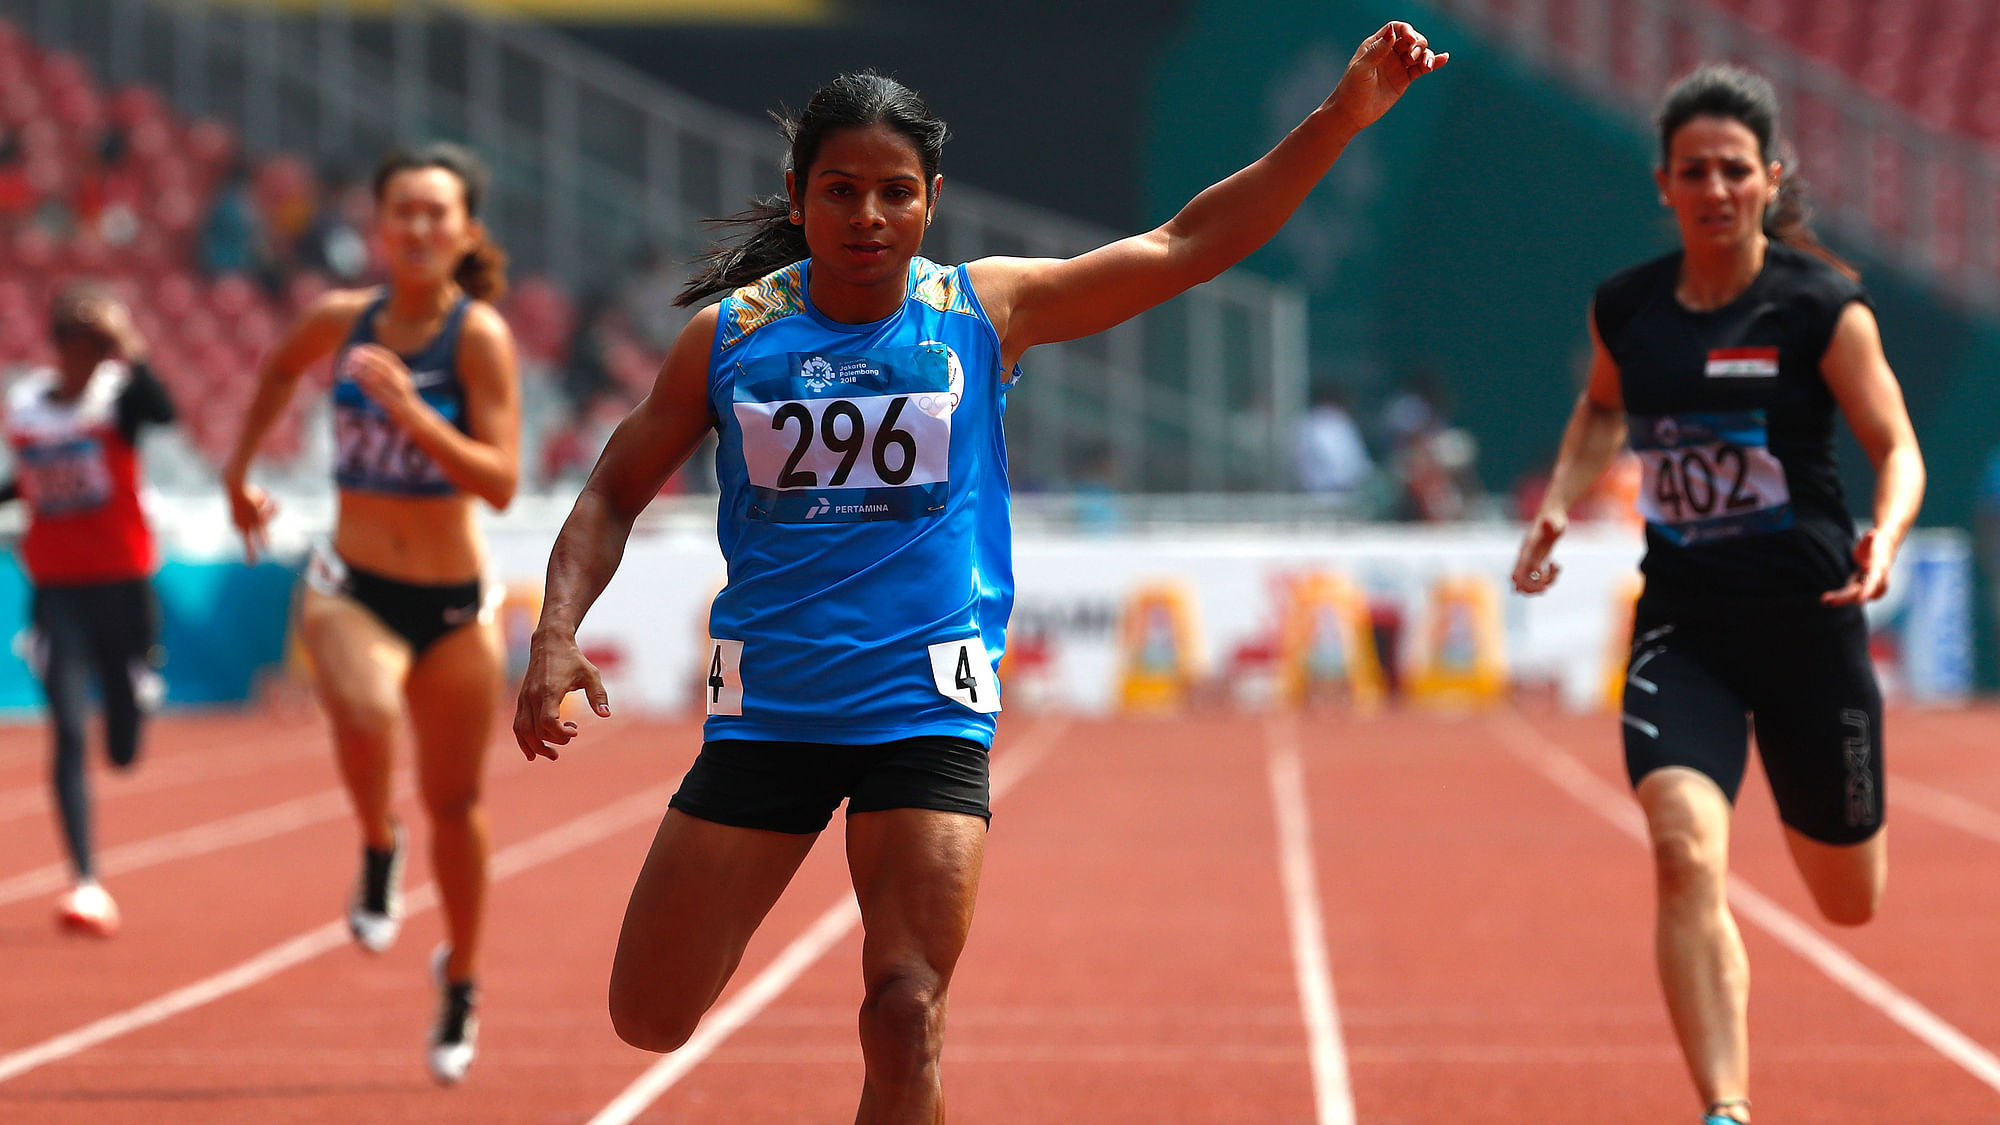 Dutee Chand has qualified for the women’s 200m semi-finals.